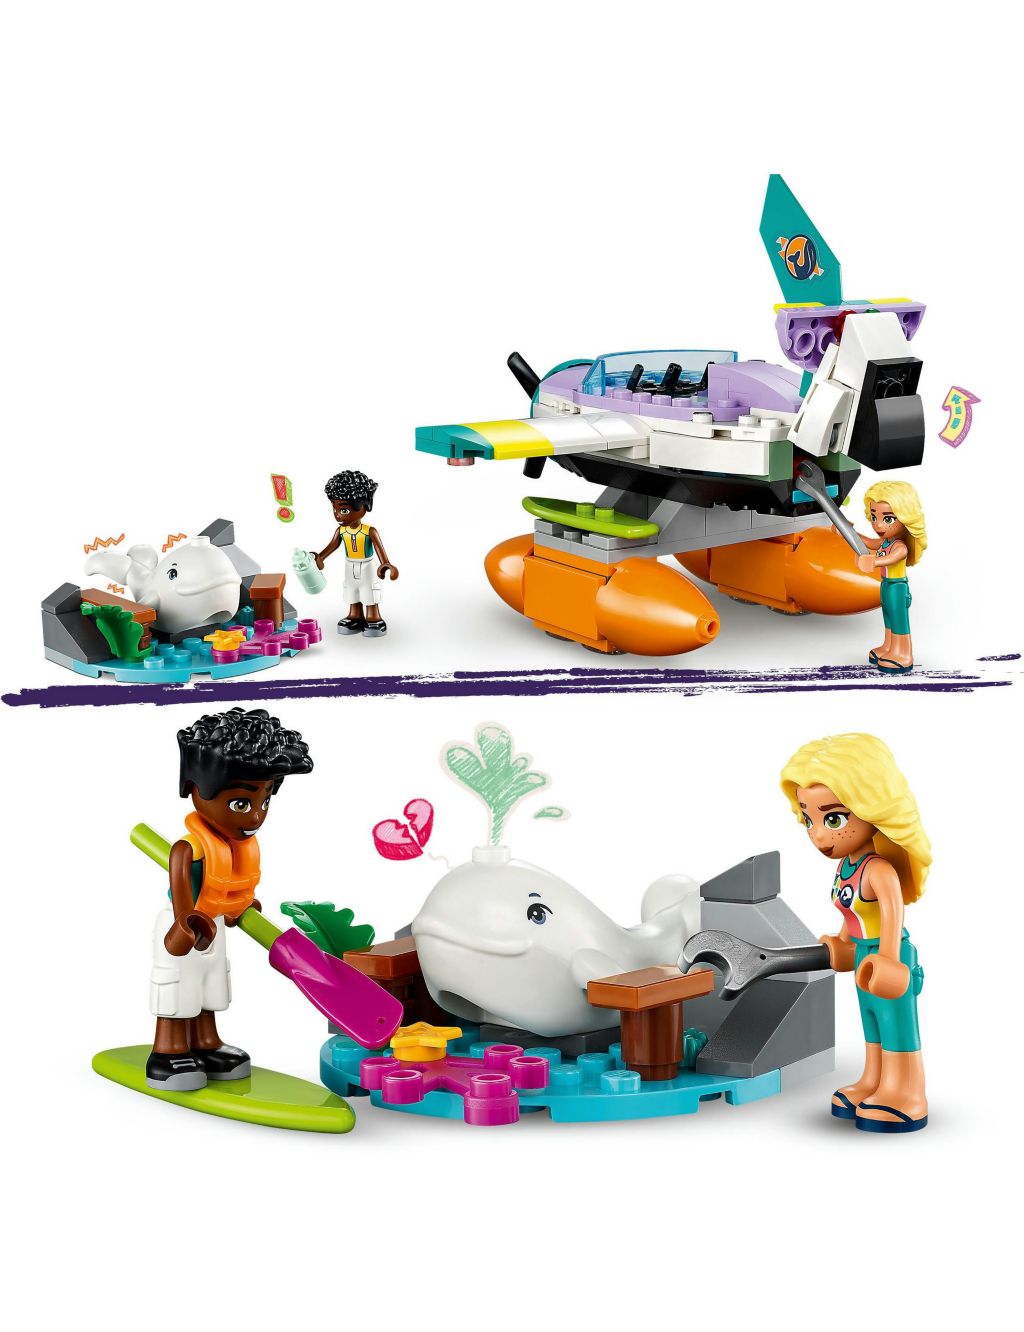 LEGO Friends Sea Rescue Plane Toy Playset (6+ Yrs) image 4